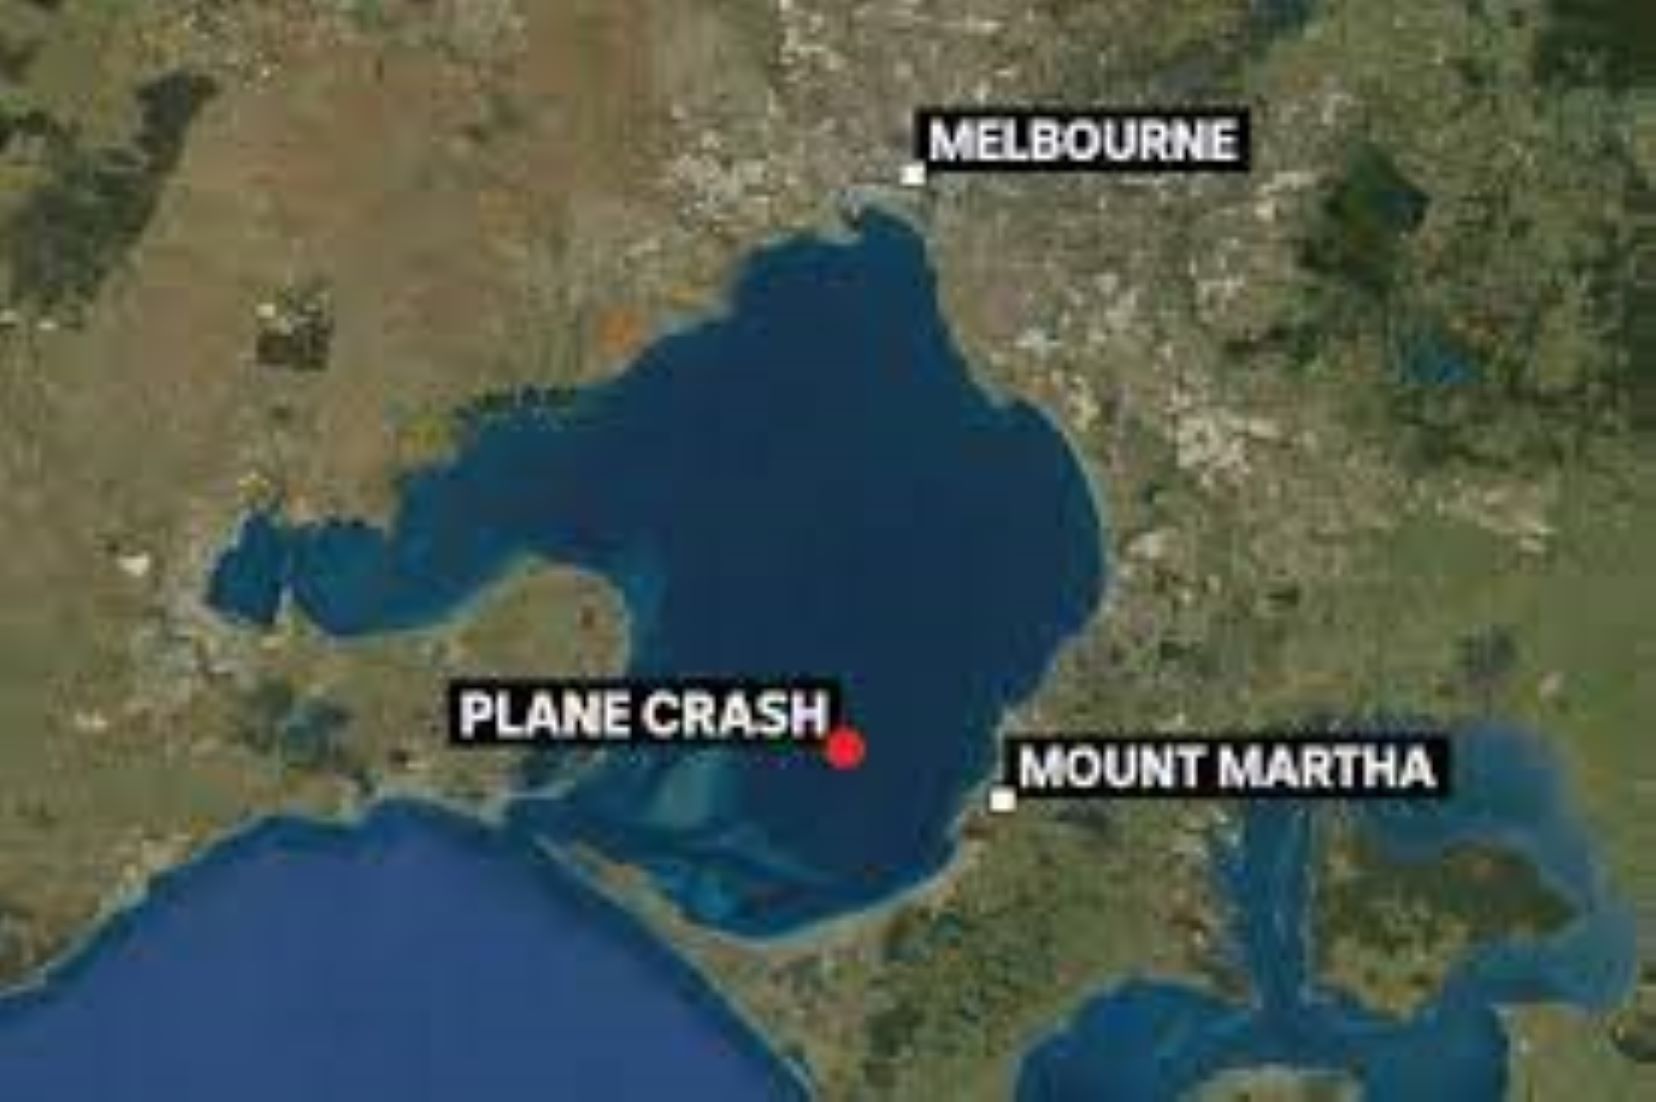 Ex-Military Plane Crashed After Mid-Air Collision In South-East Australia: Report